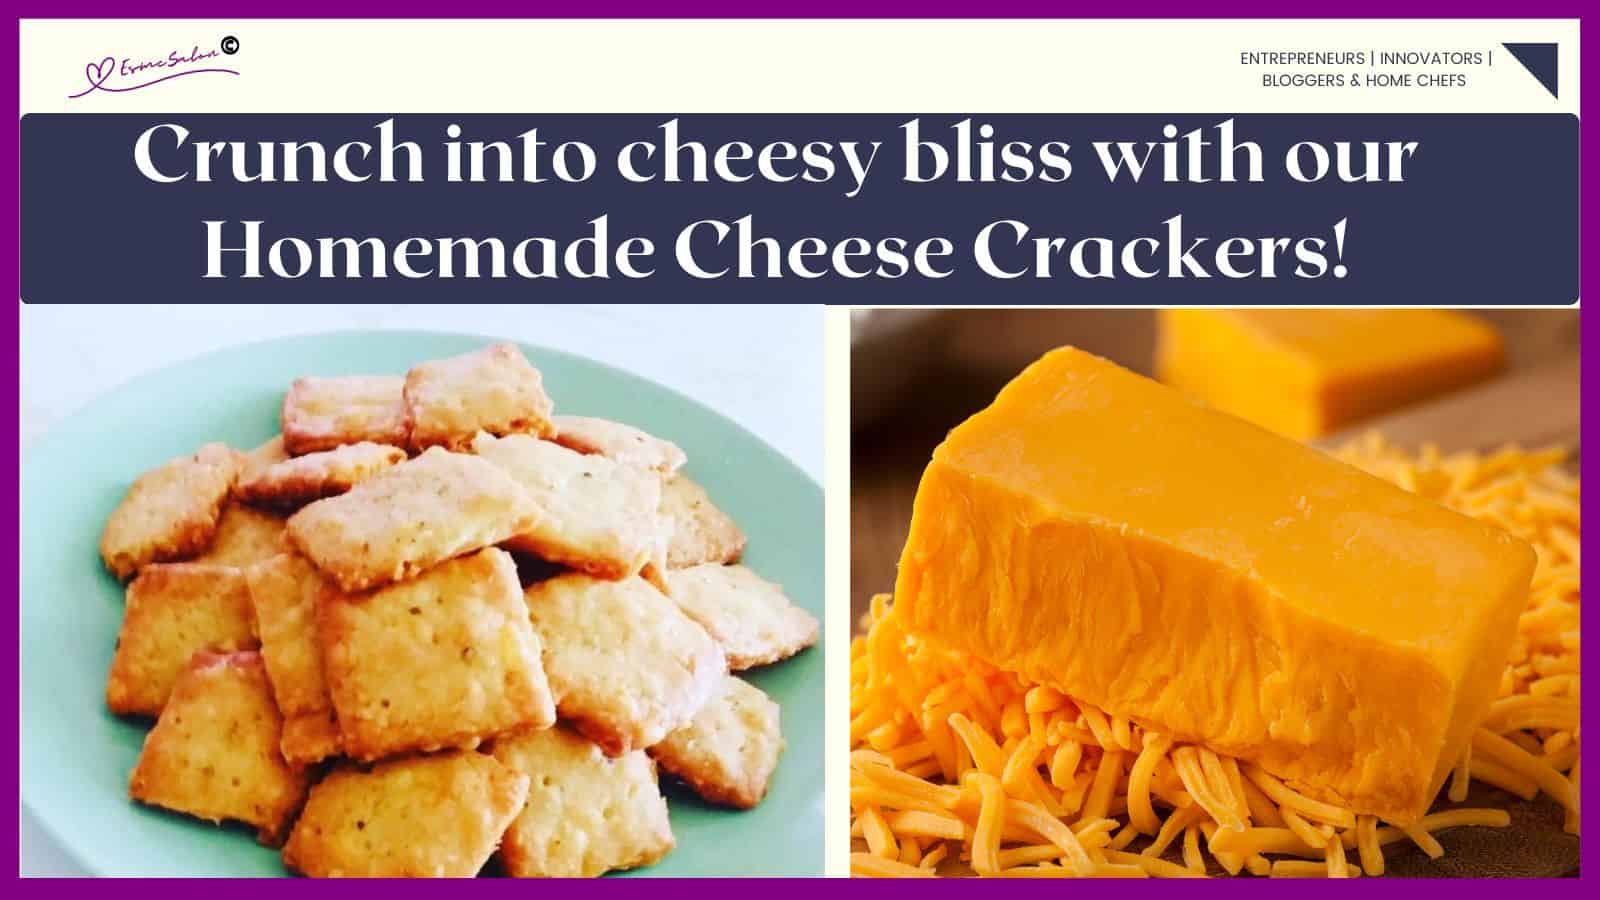 an image of a blue round plate filled with Homemade Cheese Crackers